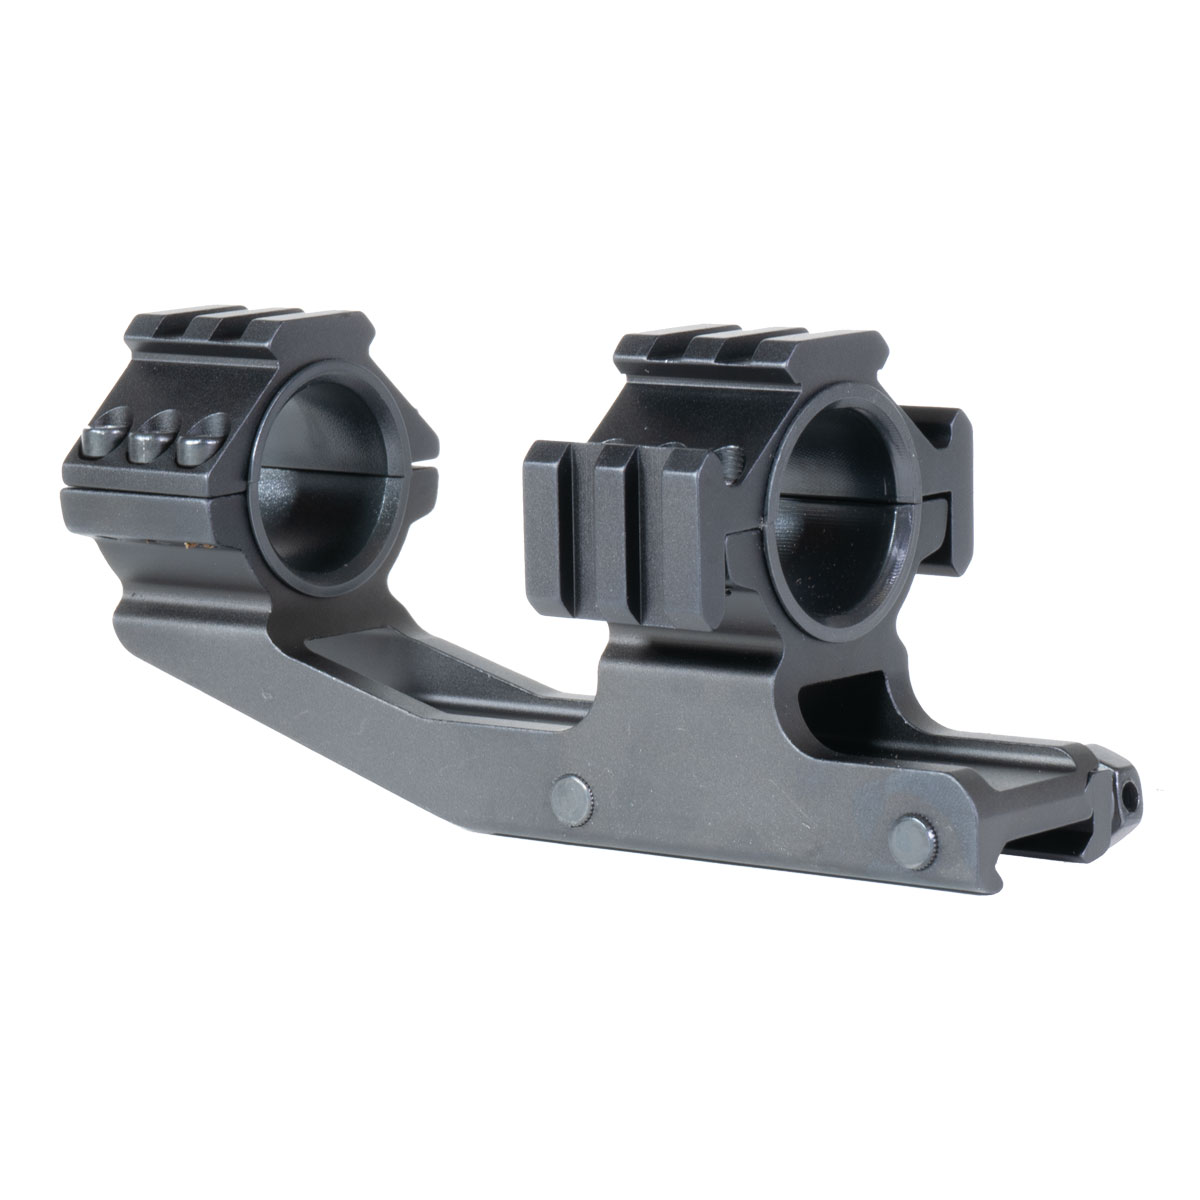 Gauntlet Arms 30mm Cantilever Scope Mount, 1.36